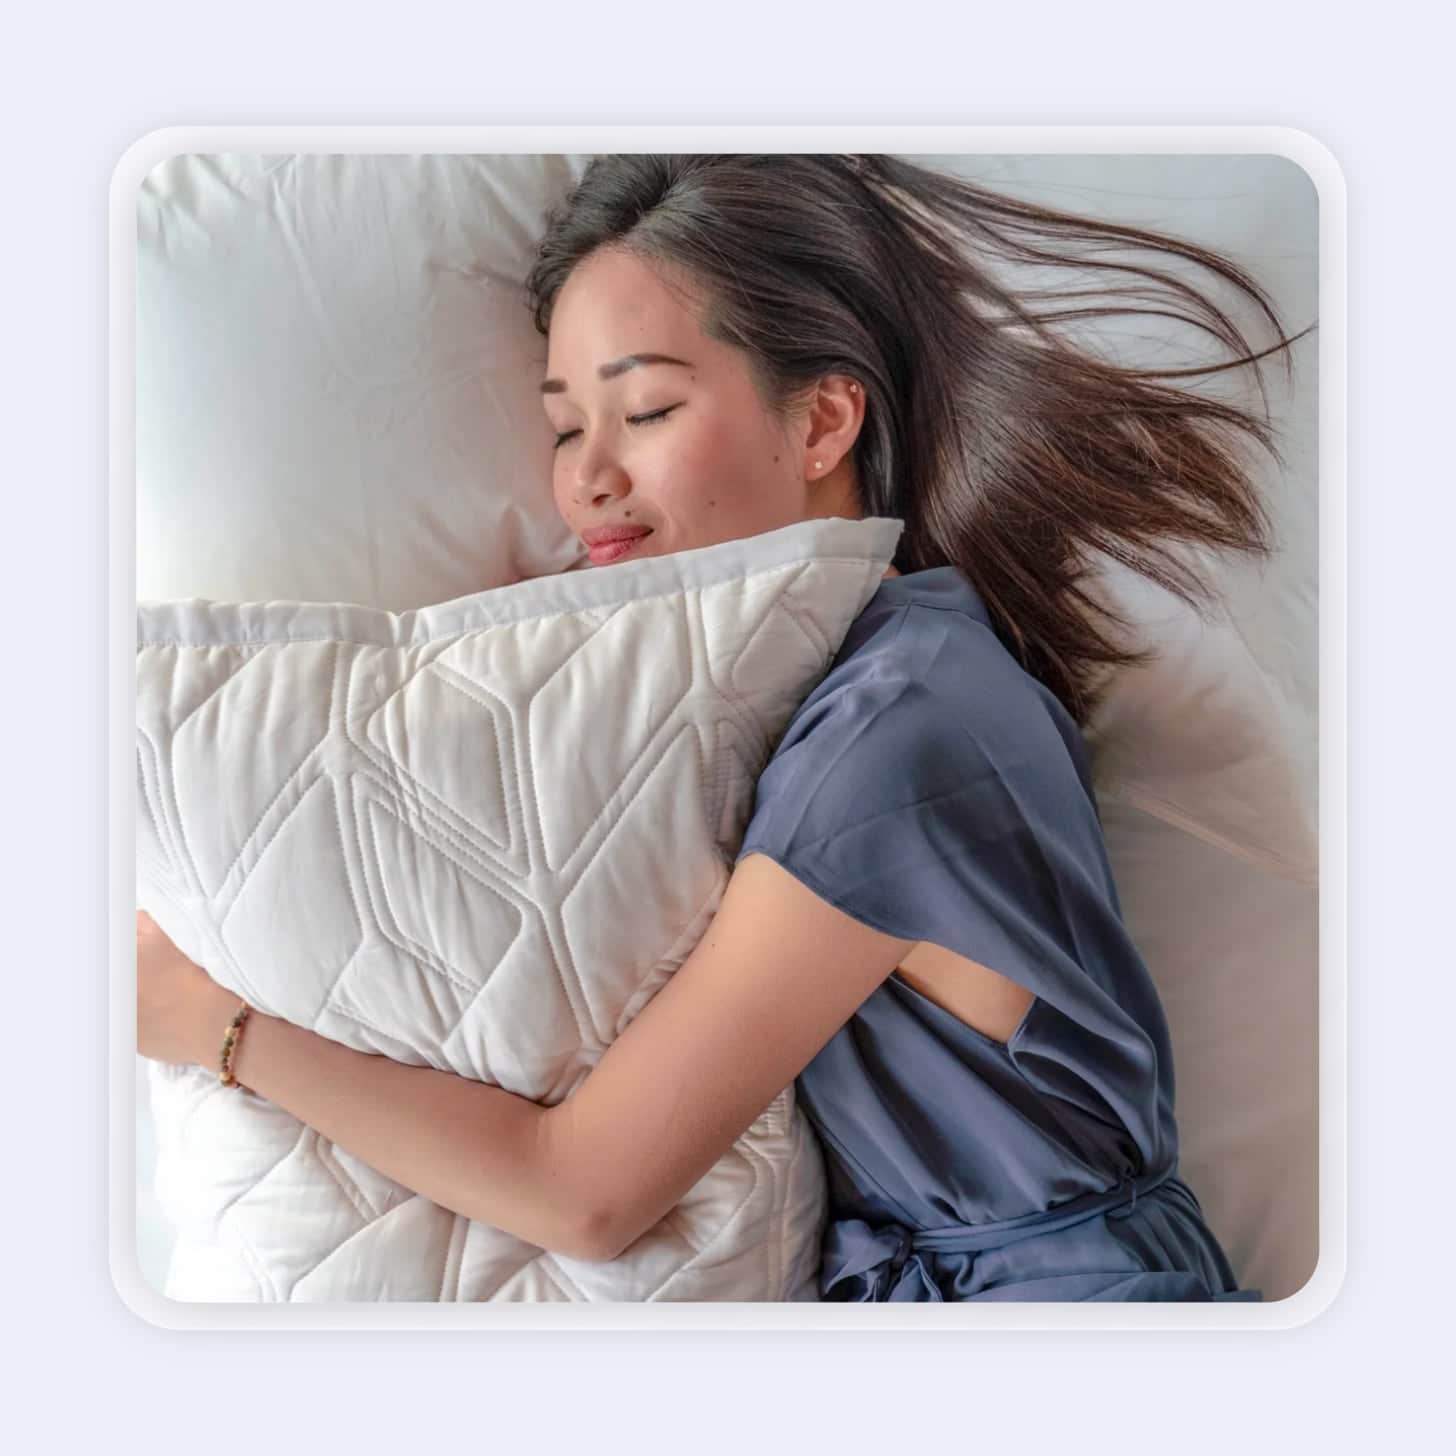 A woman hugs a pillow with a modern design in bed